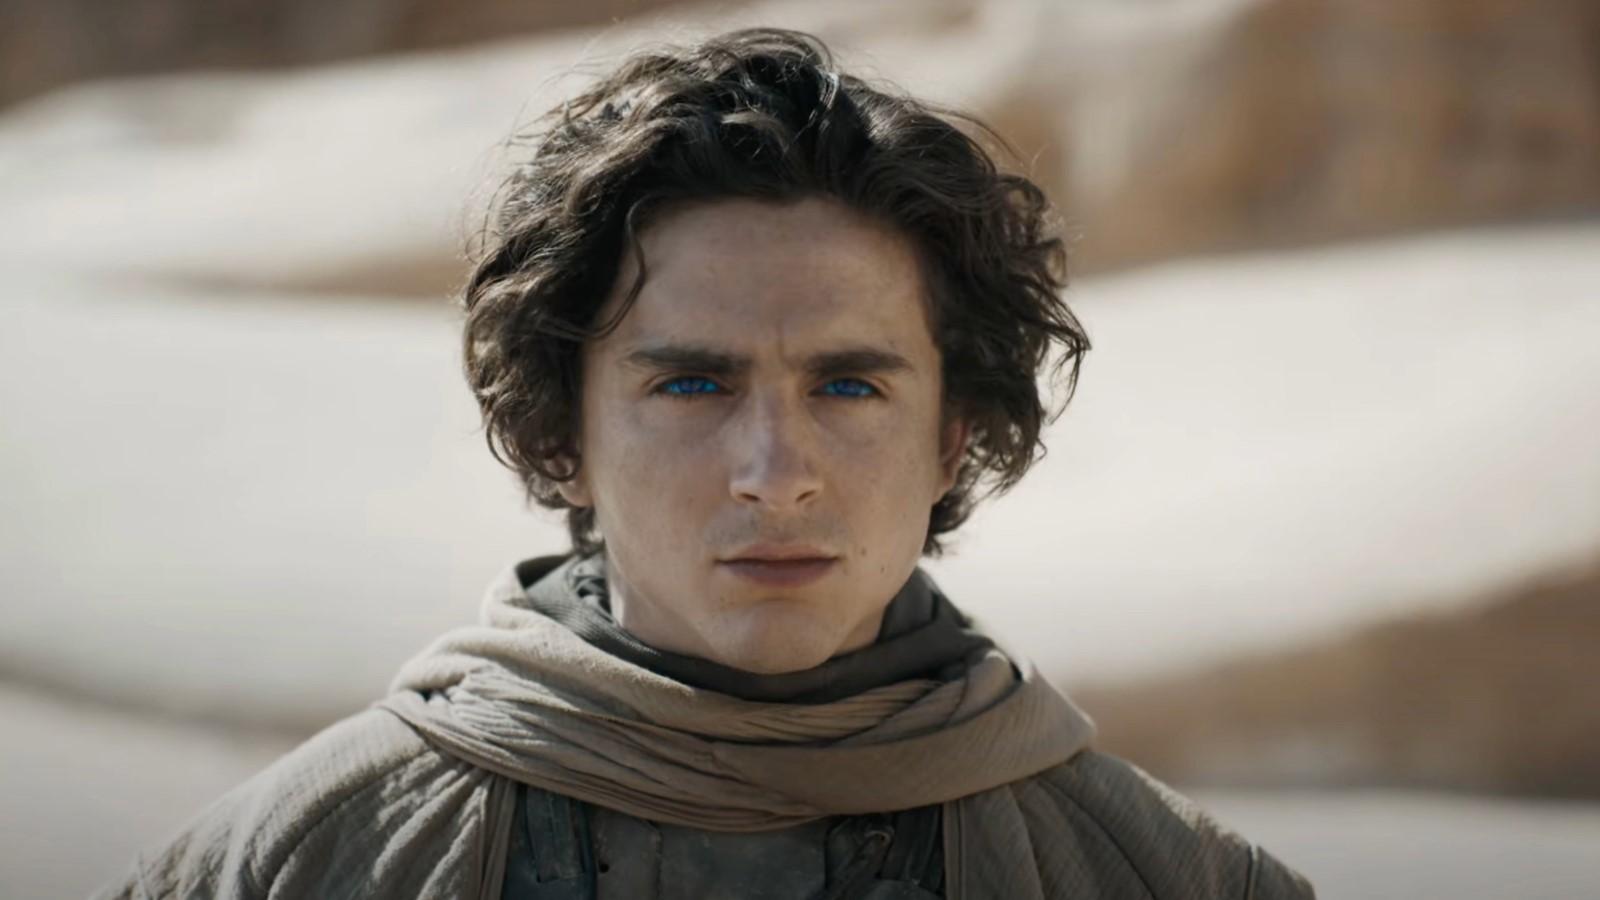 Dune: Timothée Chalamet as Paul standing in the desert and looking towards the camera